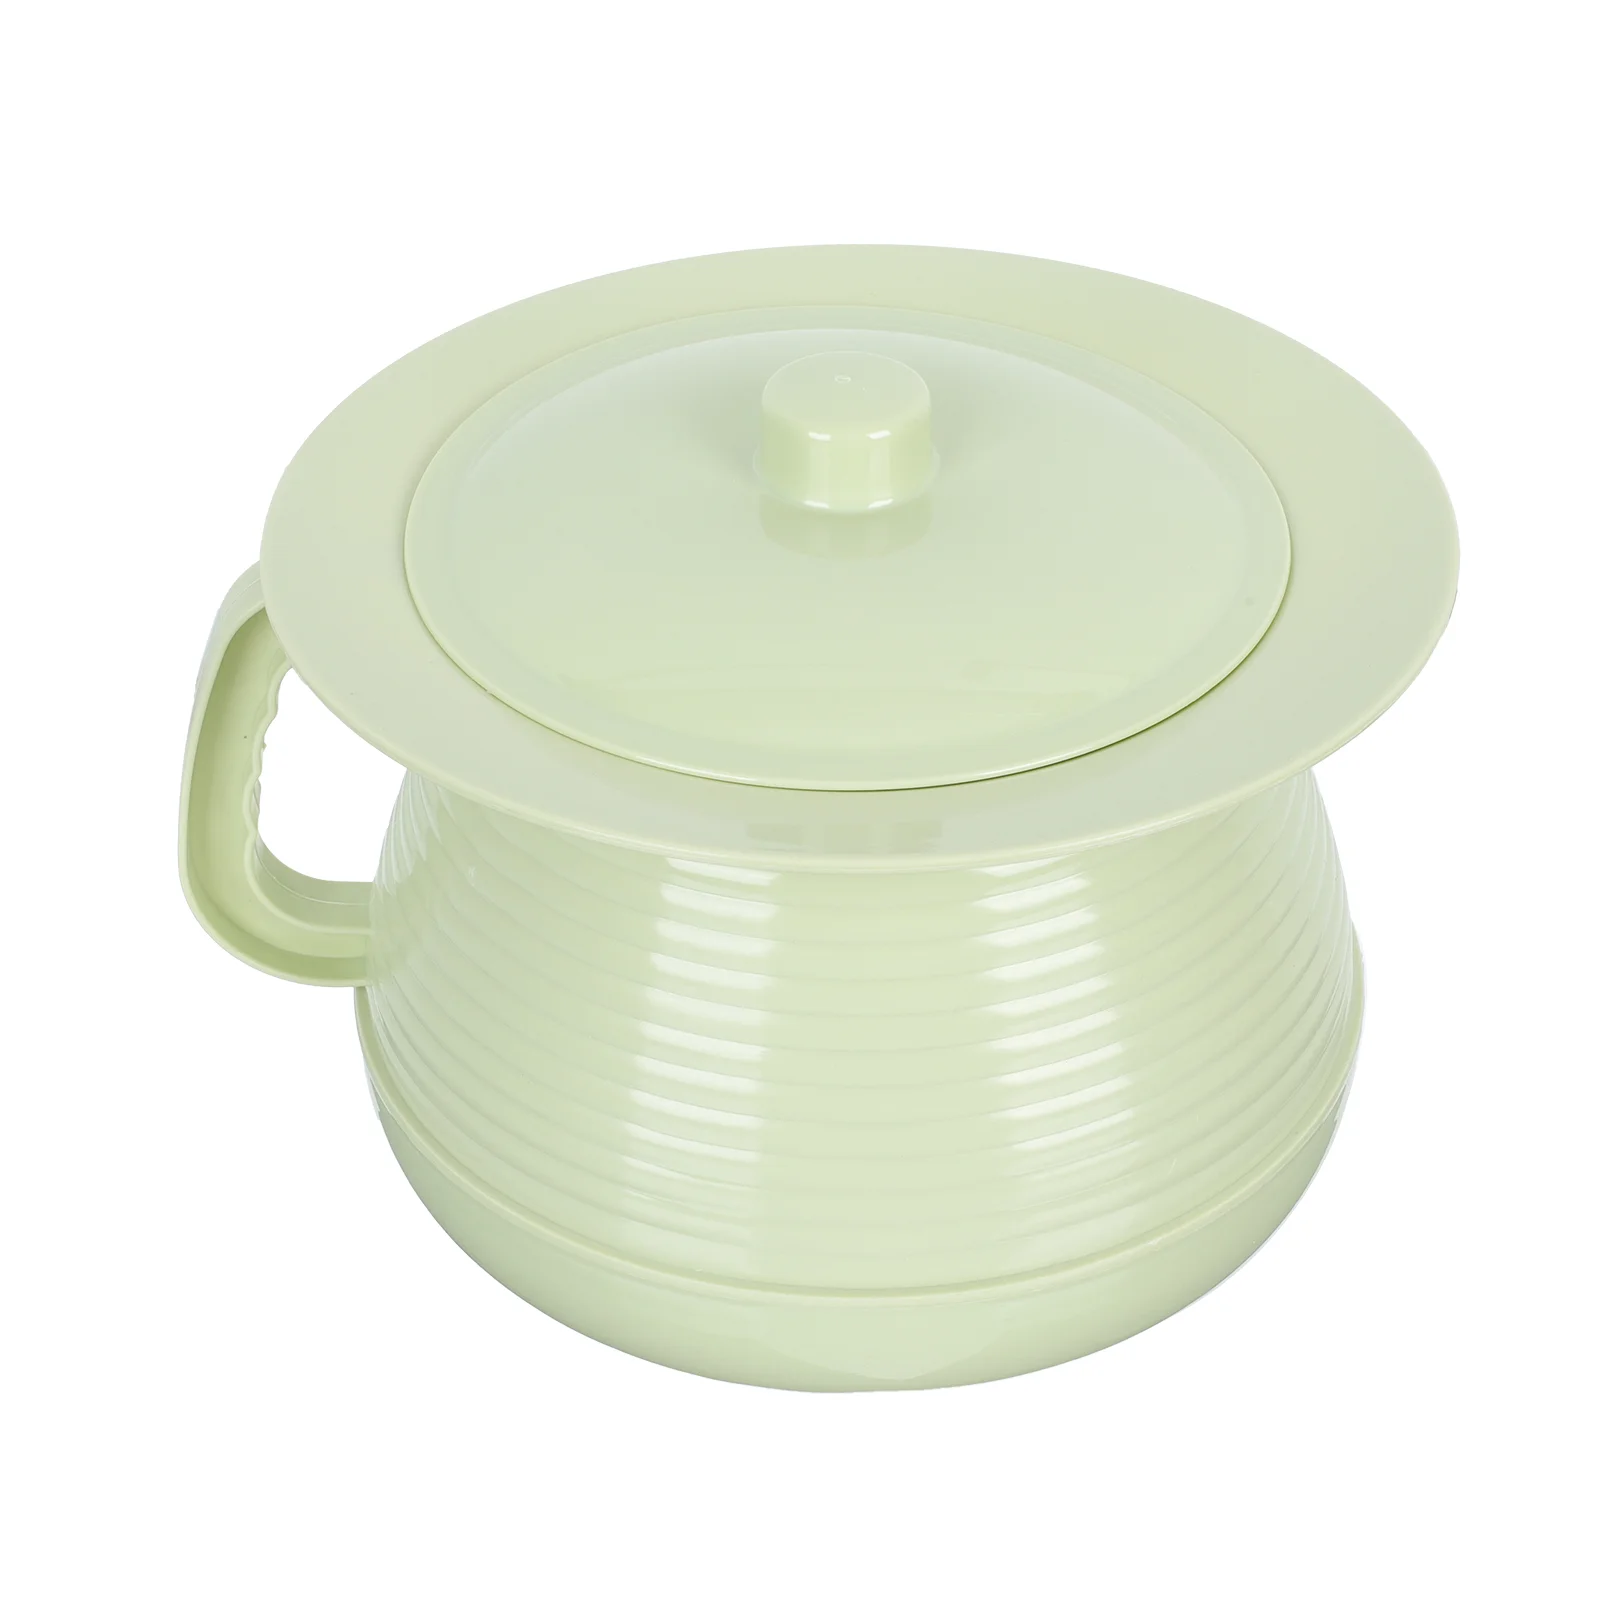 

1pc Old People Spittoon Adult Chamber Pot Spittoon with Cover Portable Spittoon